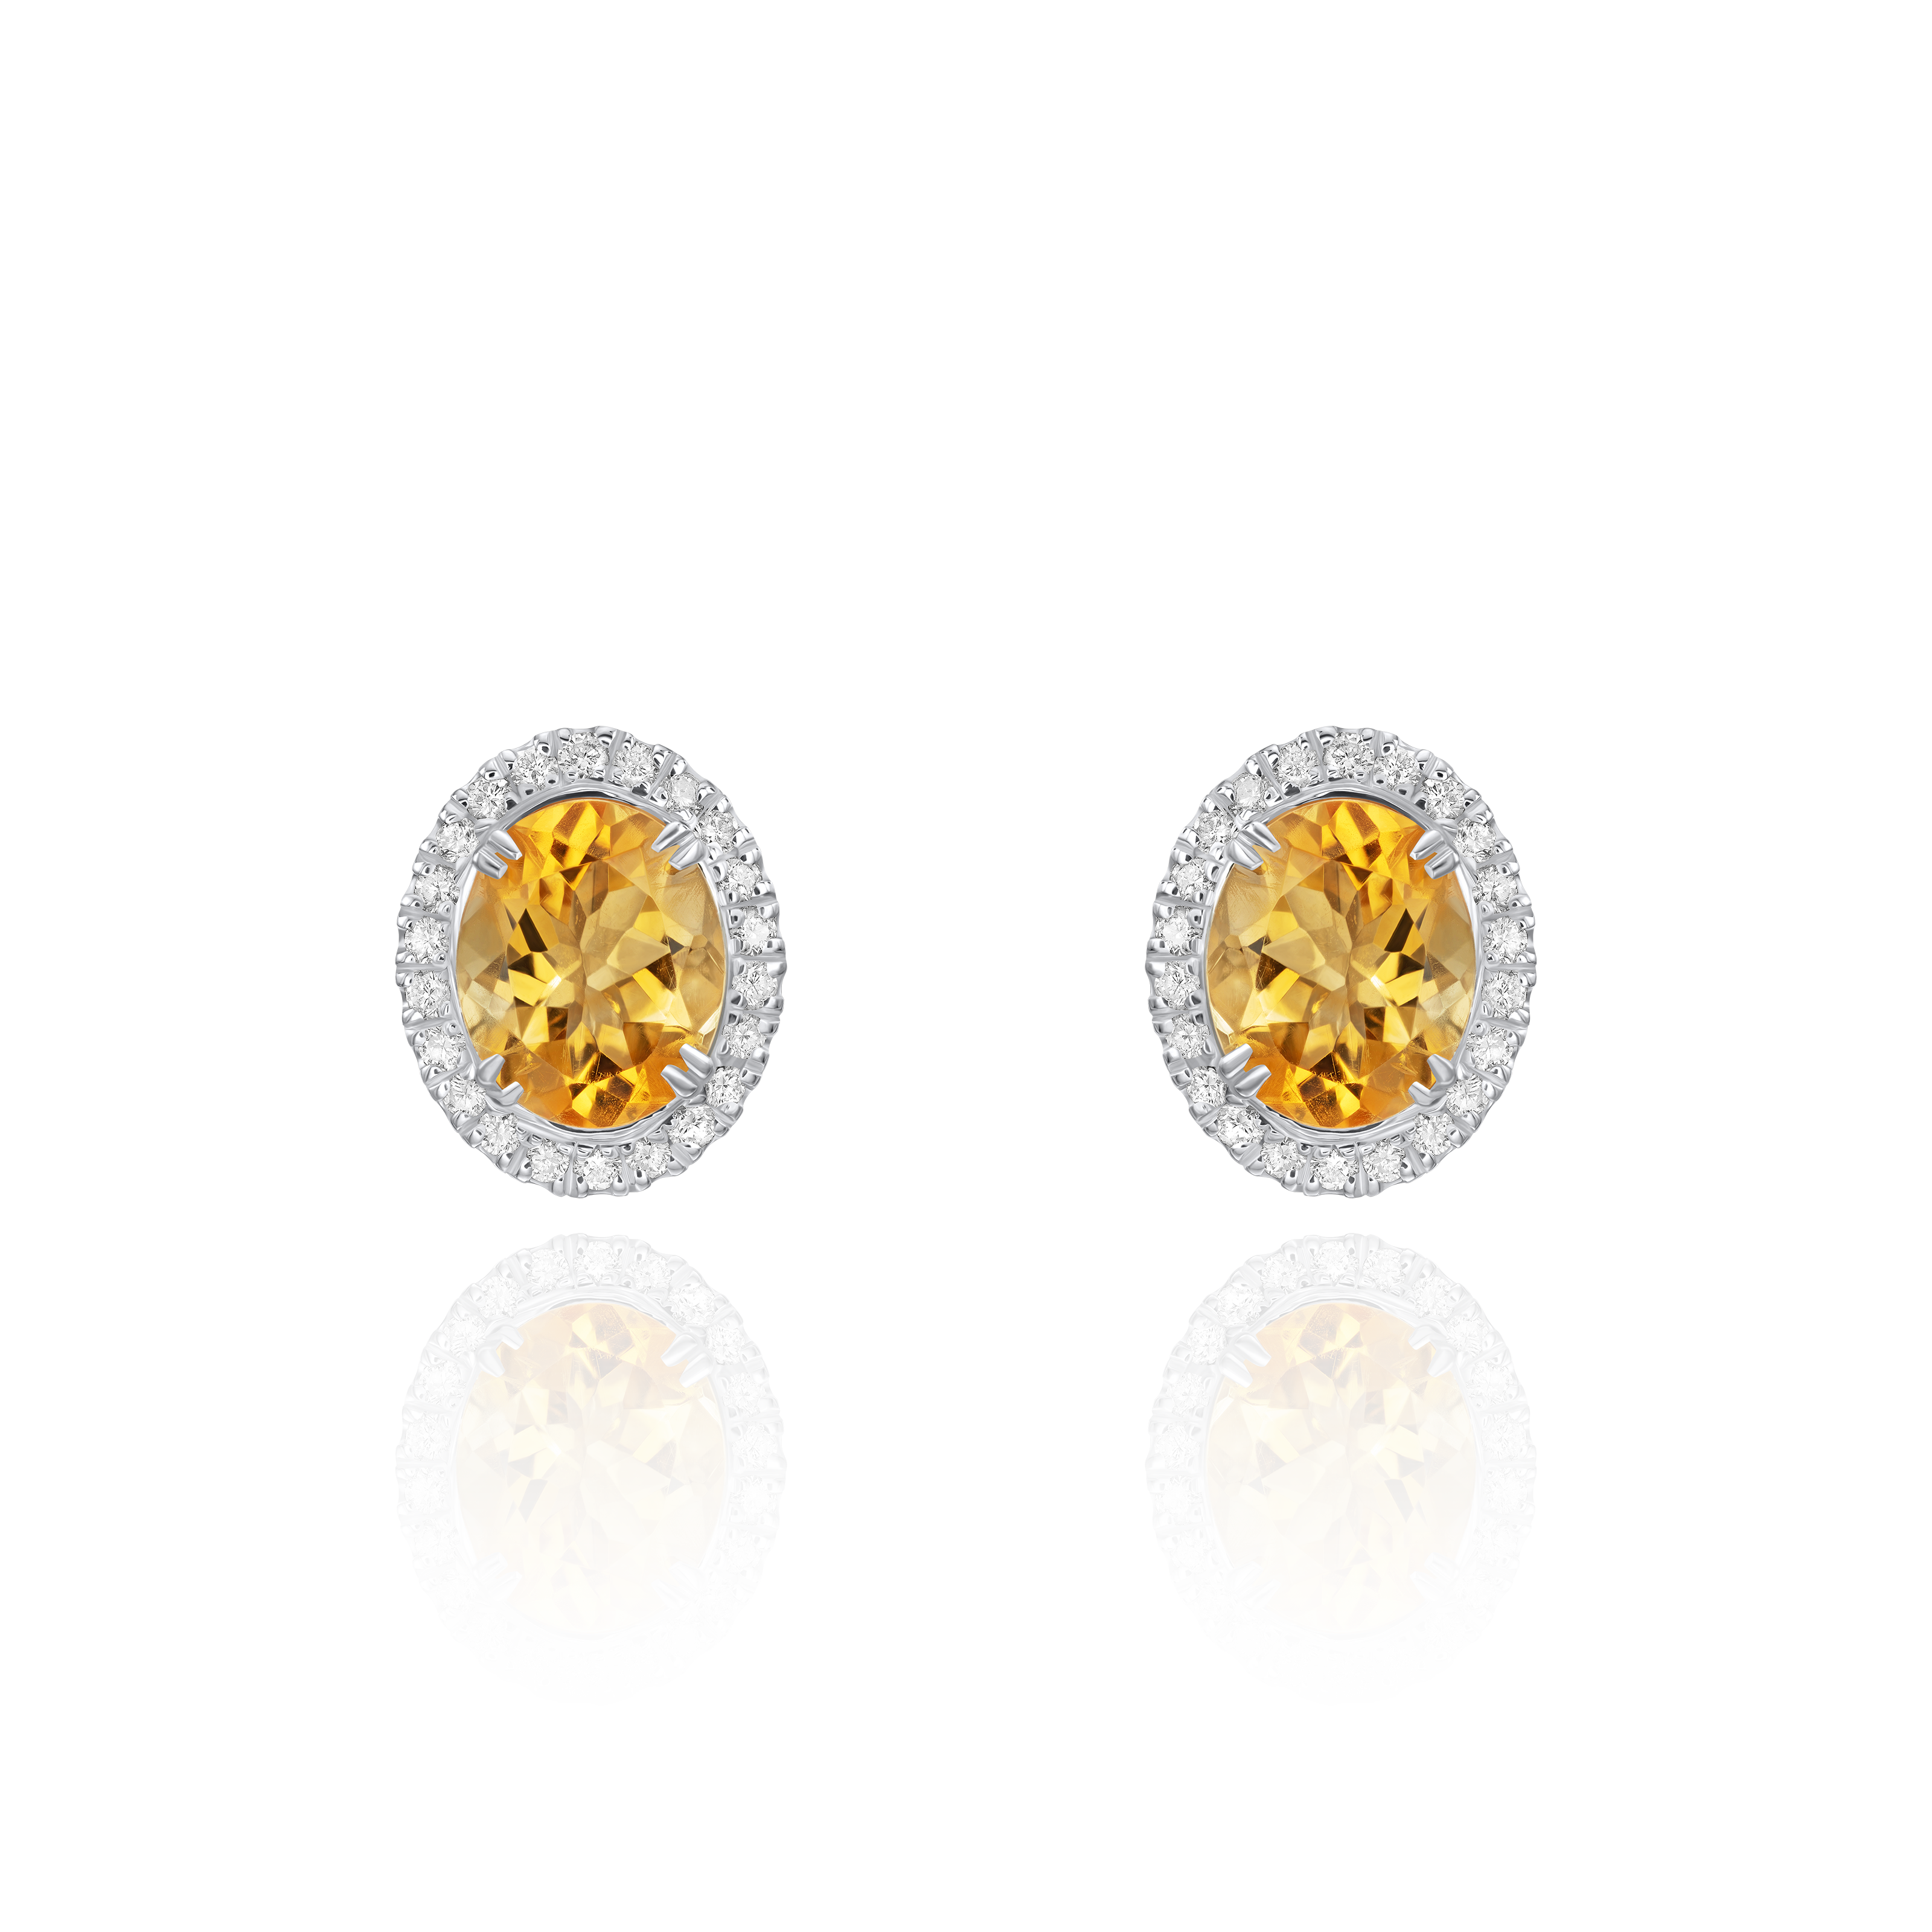 6.18cts Platinum Oval Citrine and Diamond Cluster Earrings